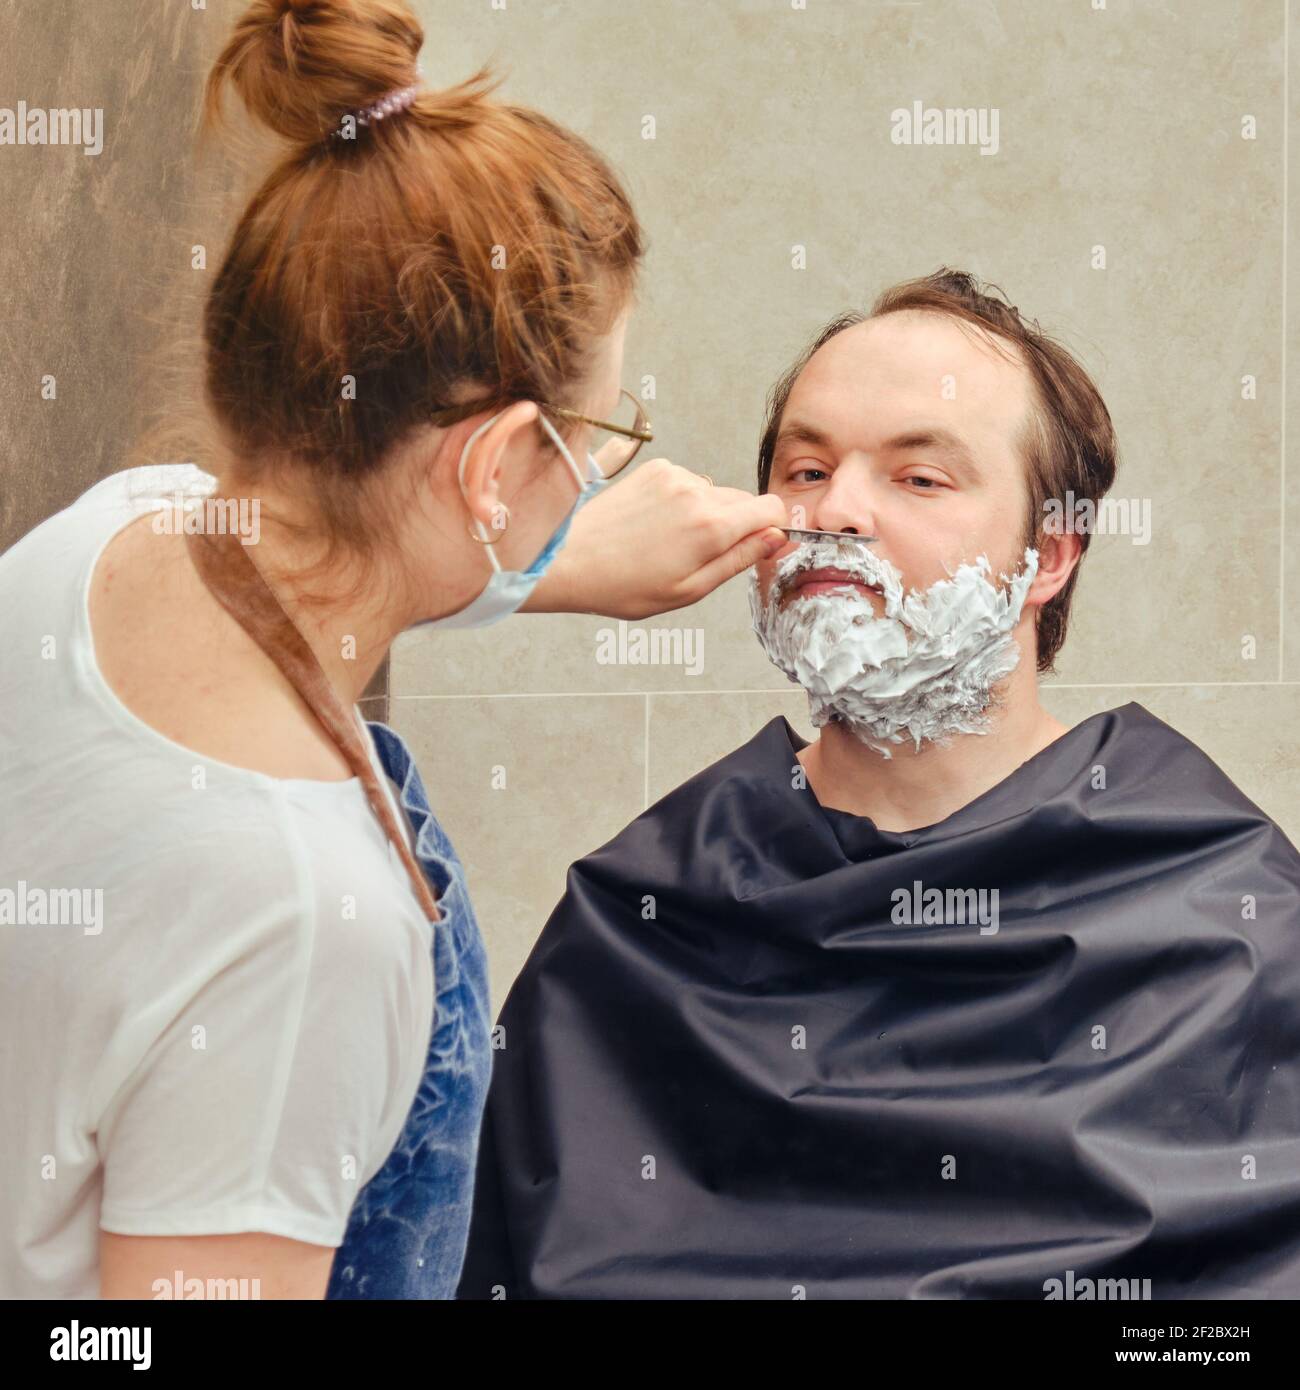 A woman shaves a man mustache with a straight razor. Concept of closed hairdressers and barbershops in isolation from the epidemic of the coronavirus Stock Photo